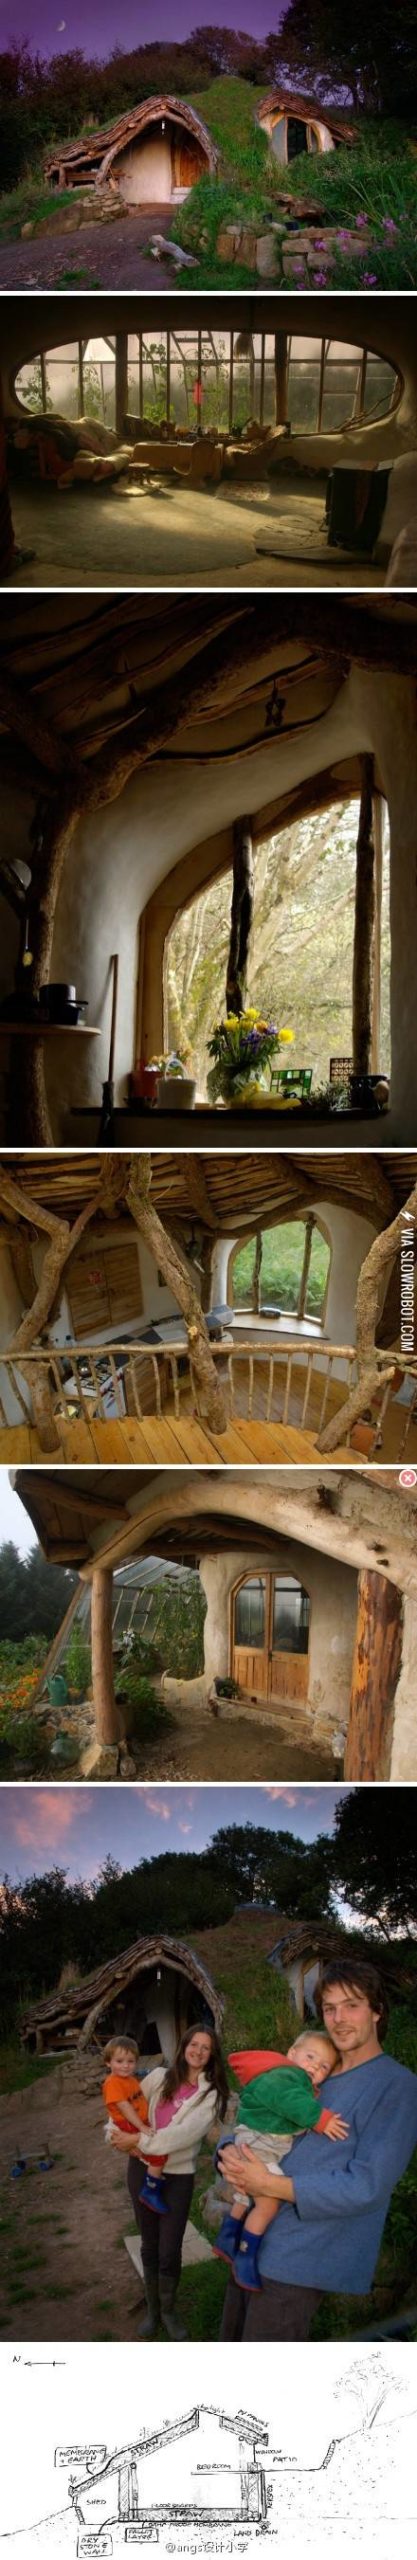 Build Your Own Hobbit Hole Home